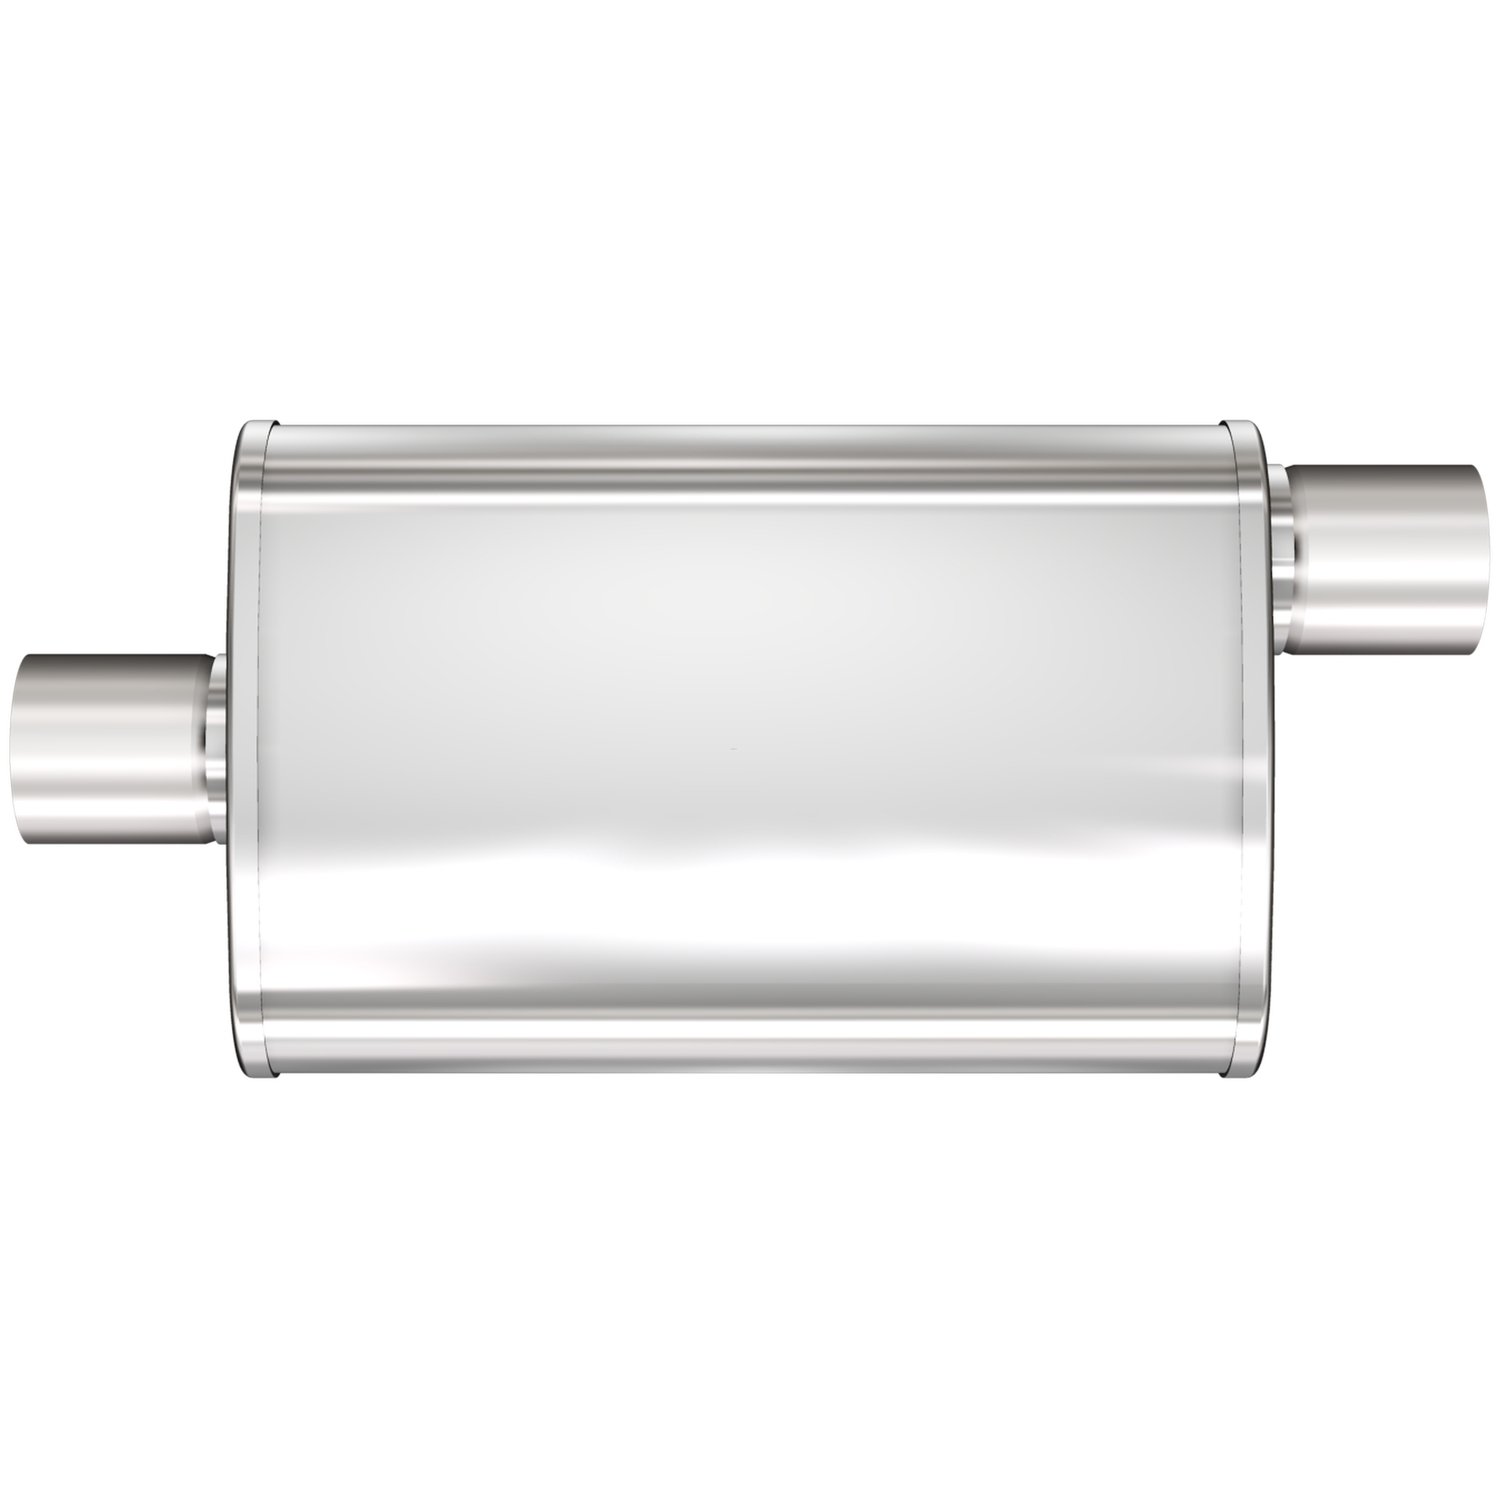 4" x 9" Oval XL 3-Chamber Muffler Center In/Offset Out: 2"/2" Body Length: 14" Overall Length: 20" Satin Finish